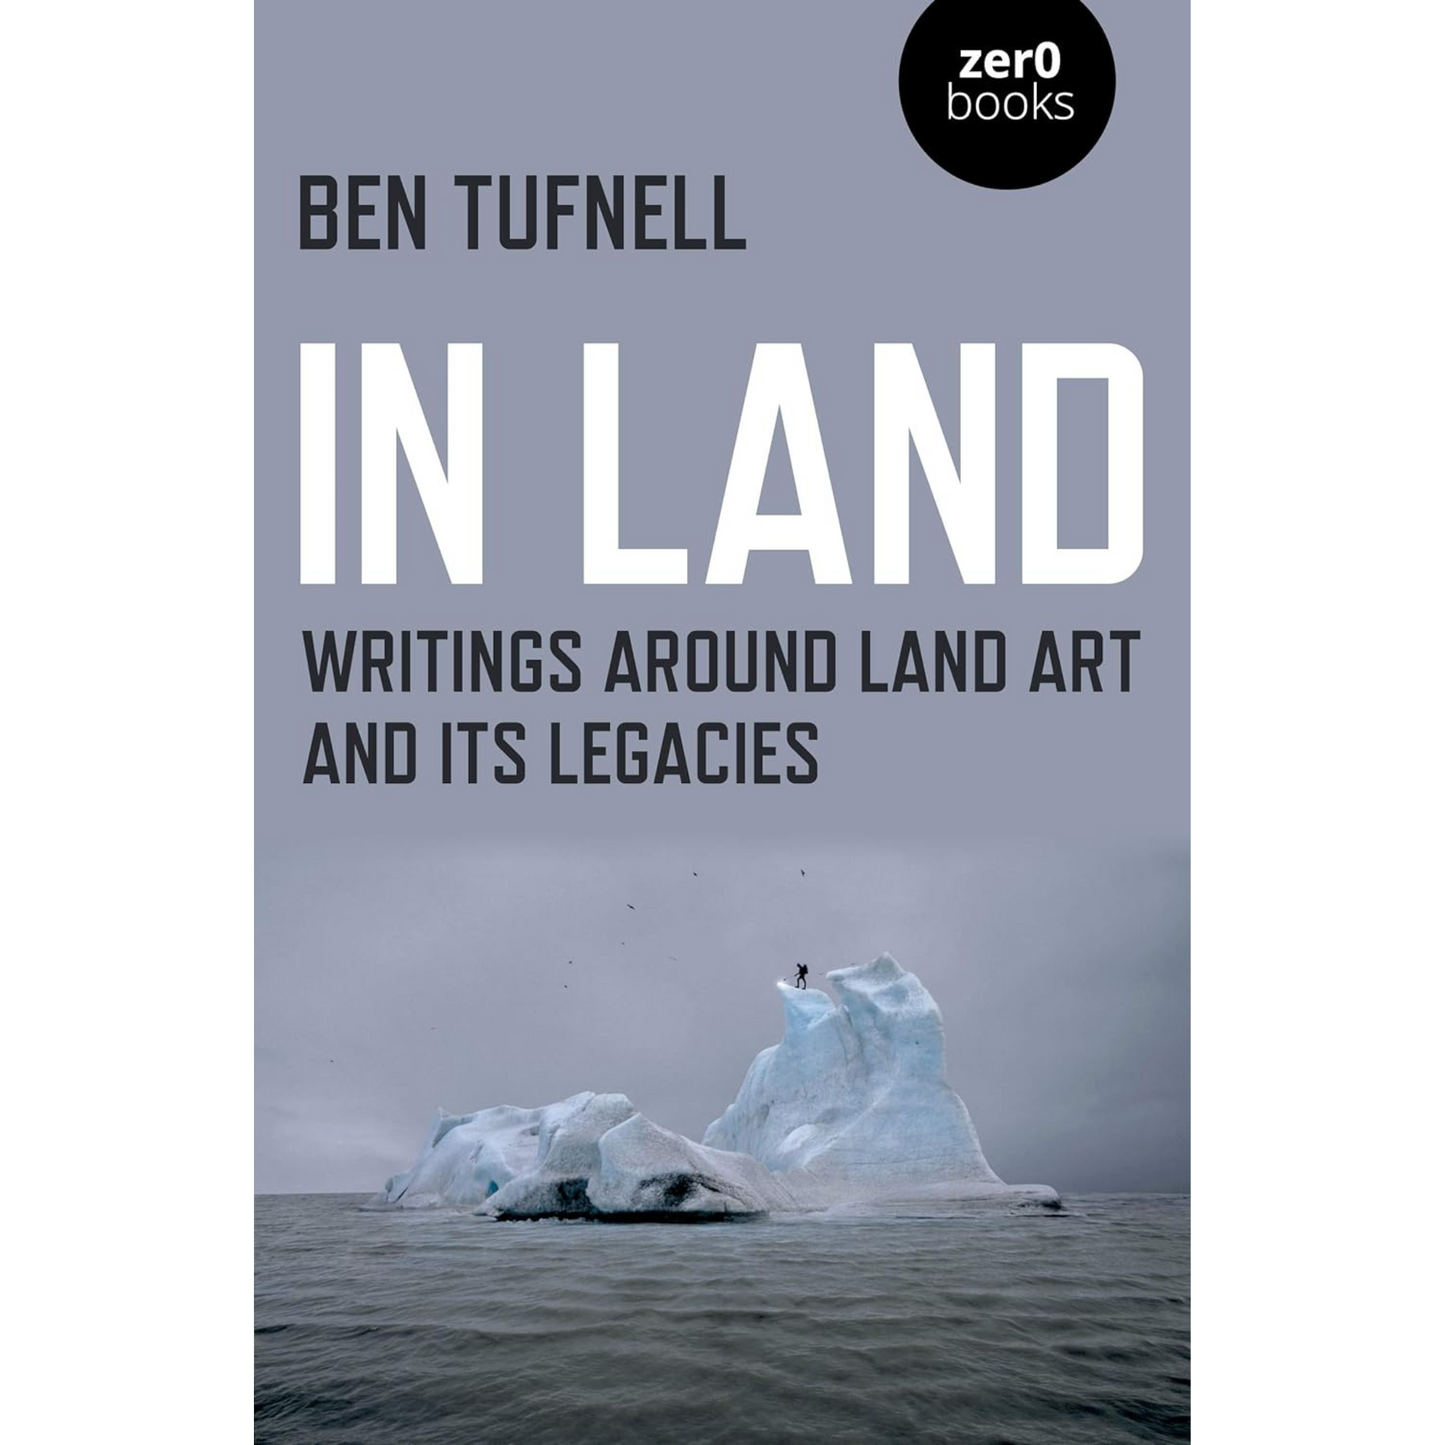 In Land: Writings around Land Art and its Legacies